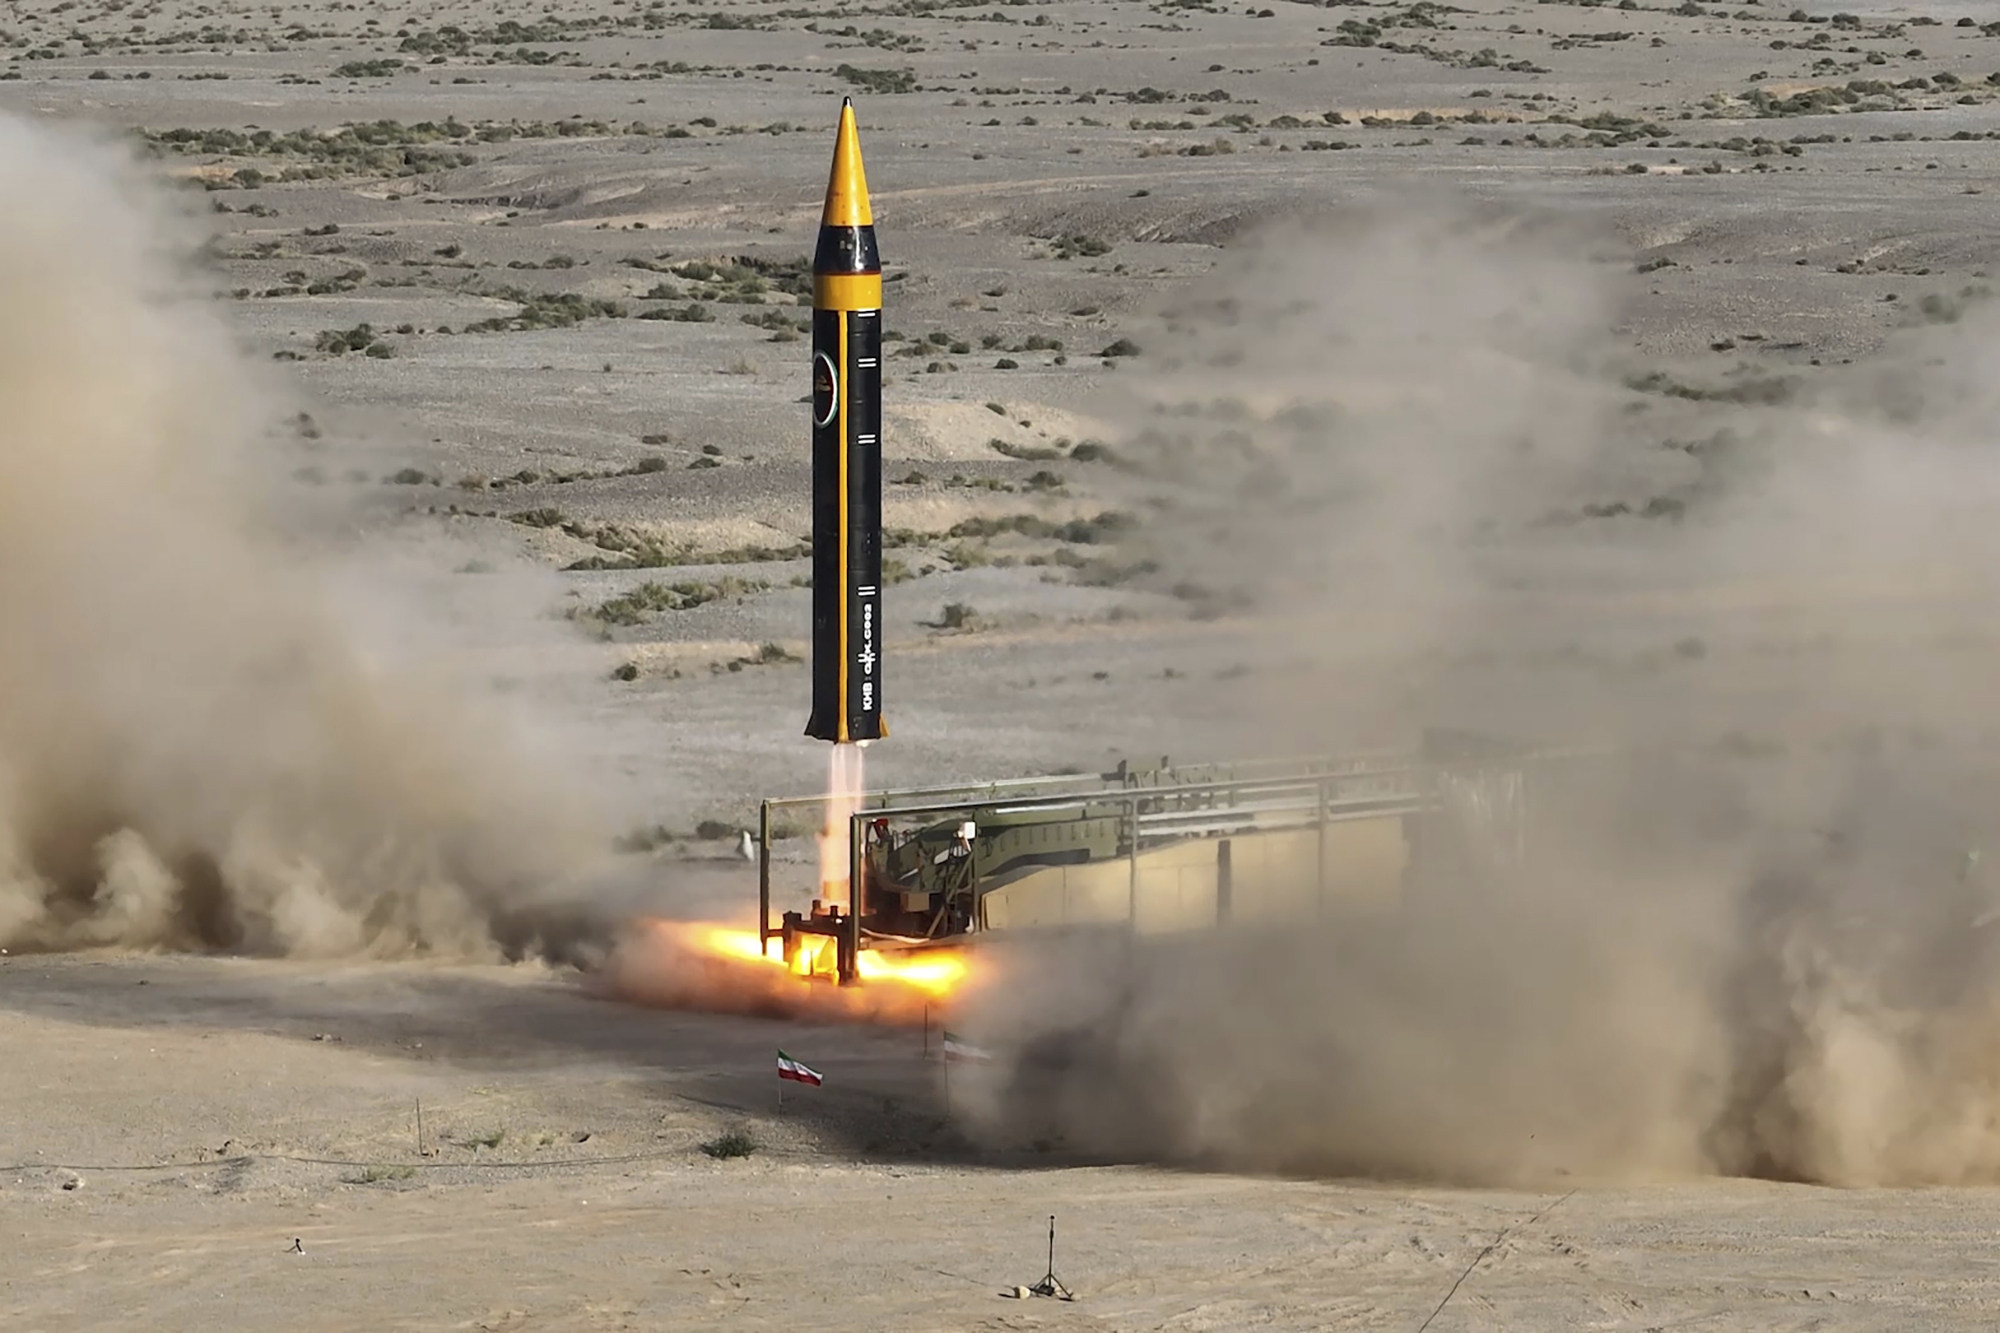 A Khorramshahr-4 missile is launched at an undisclosed location in Iran in May. Photo: Iranian Defence Ministry via AP